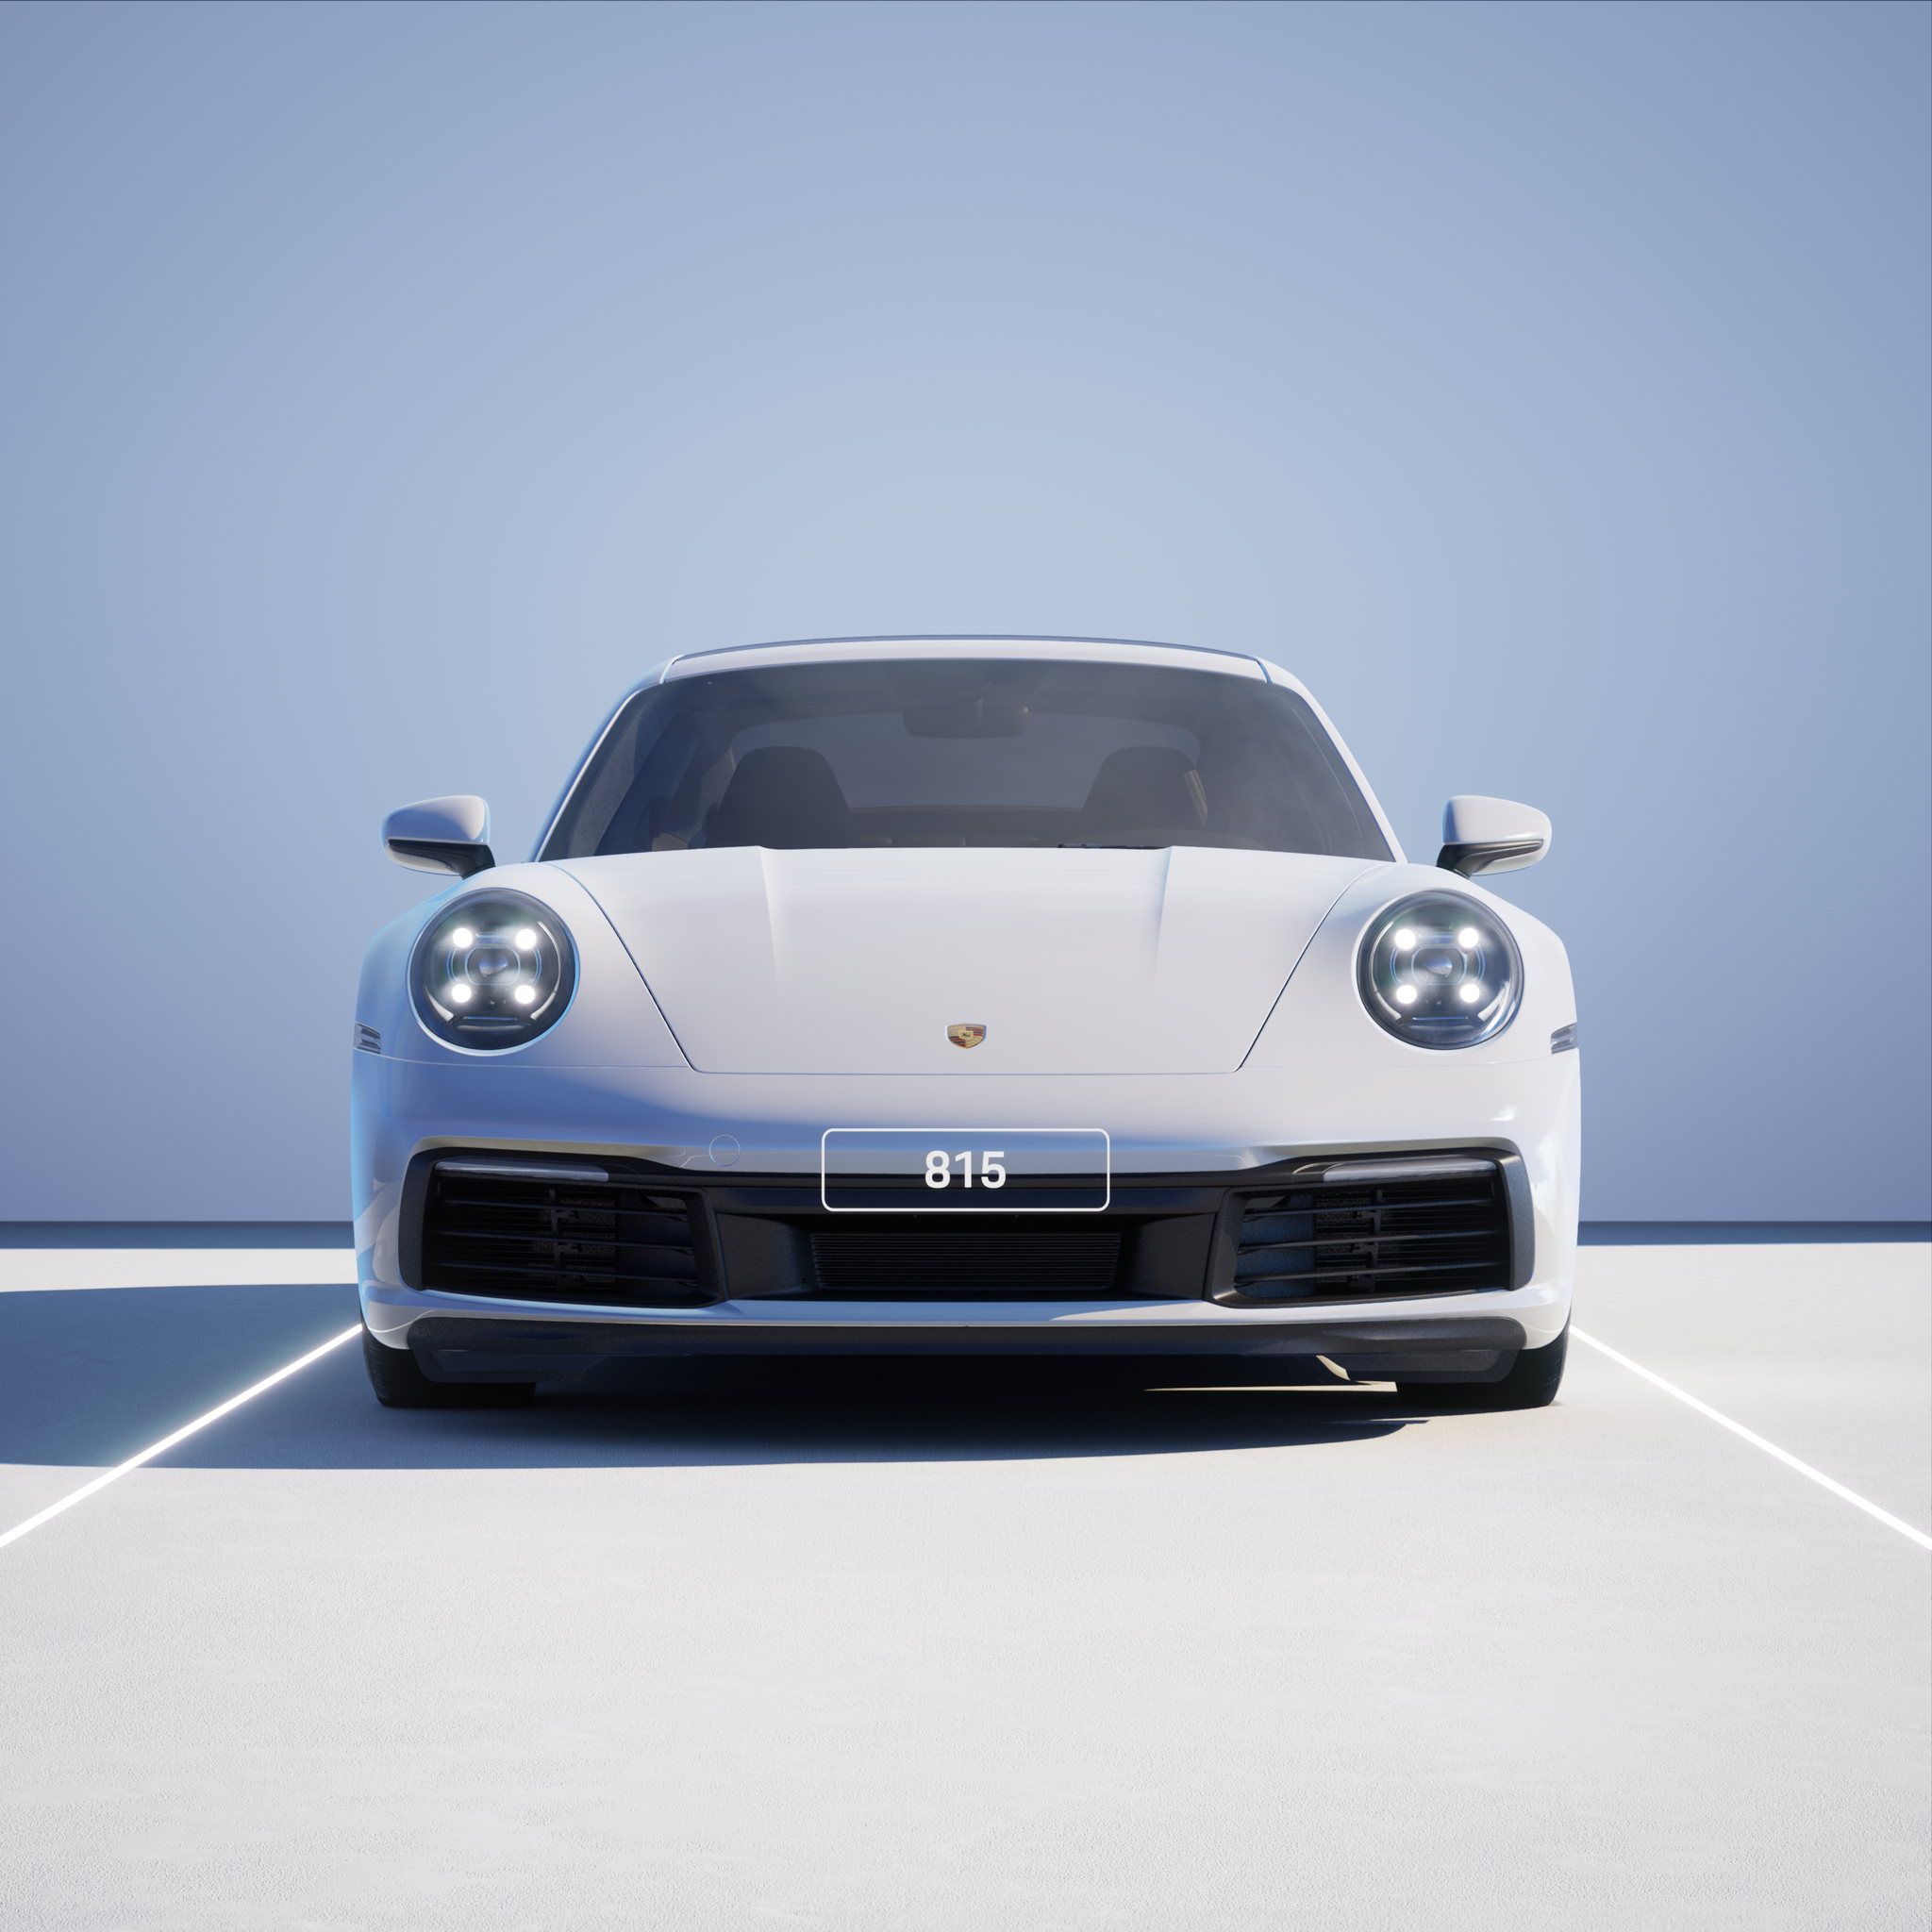 The PORSCHΞ 911 815 image in phase